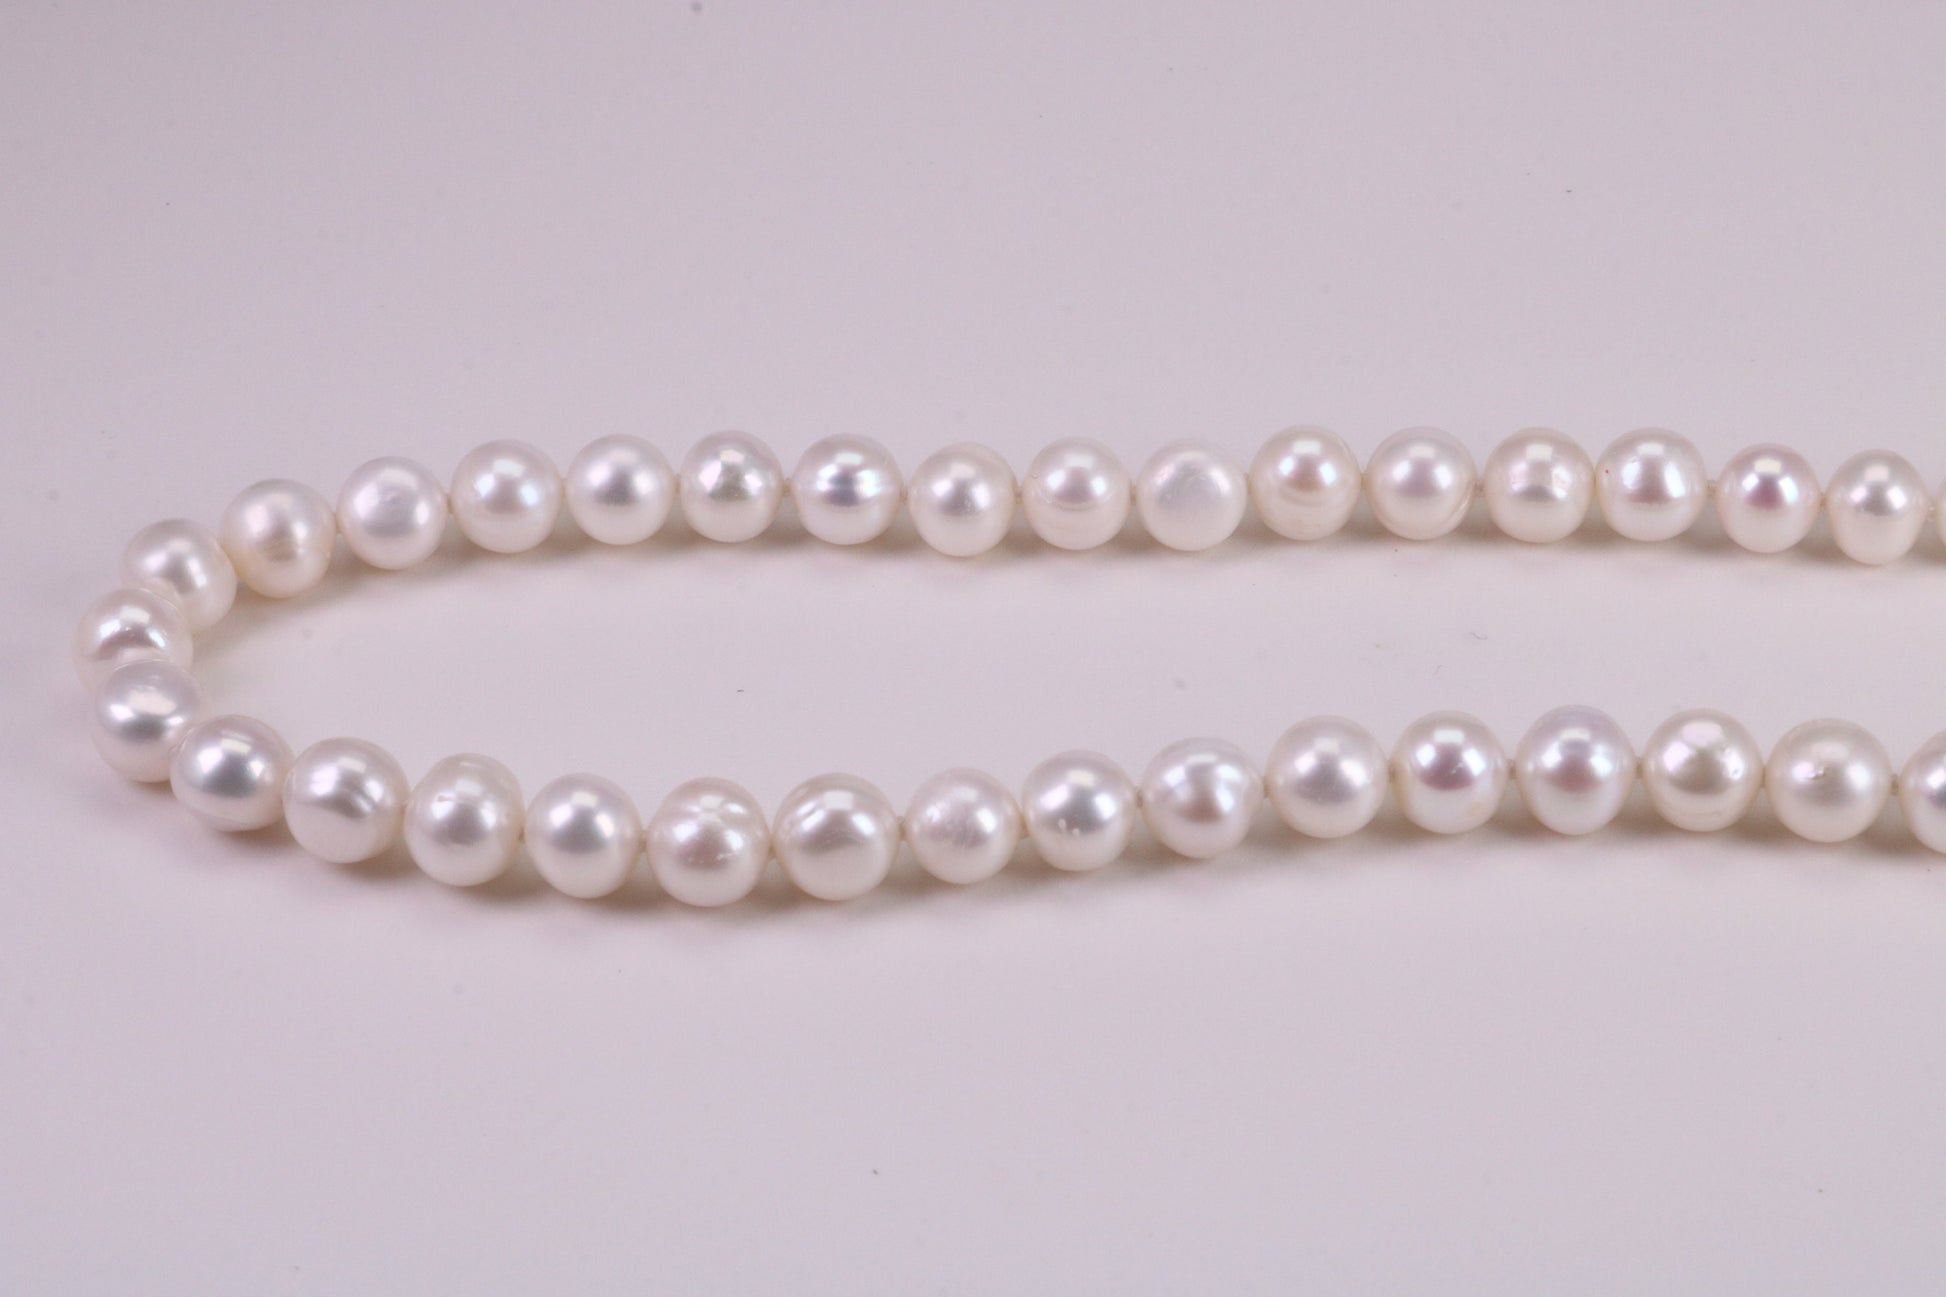 18 Inches Long Single Strand Natural 8 mm Round Pearl Necklace set in Silver